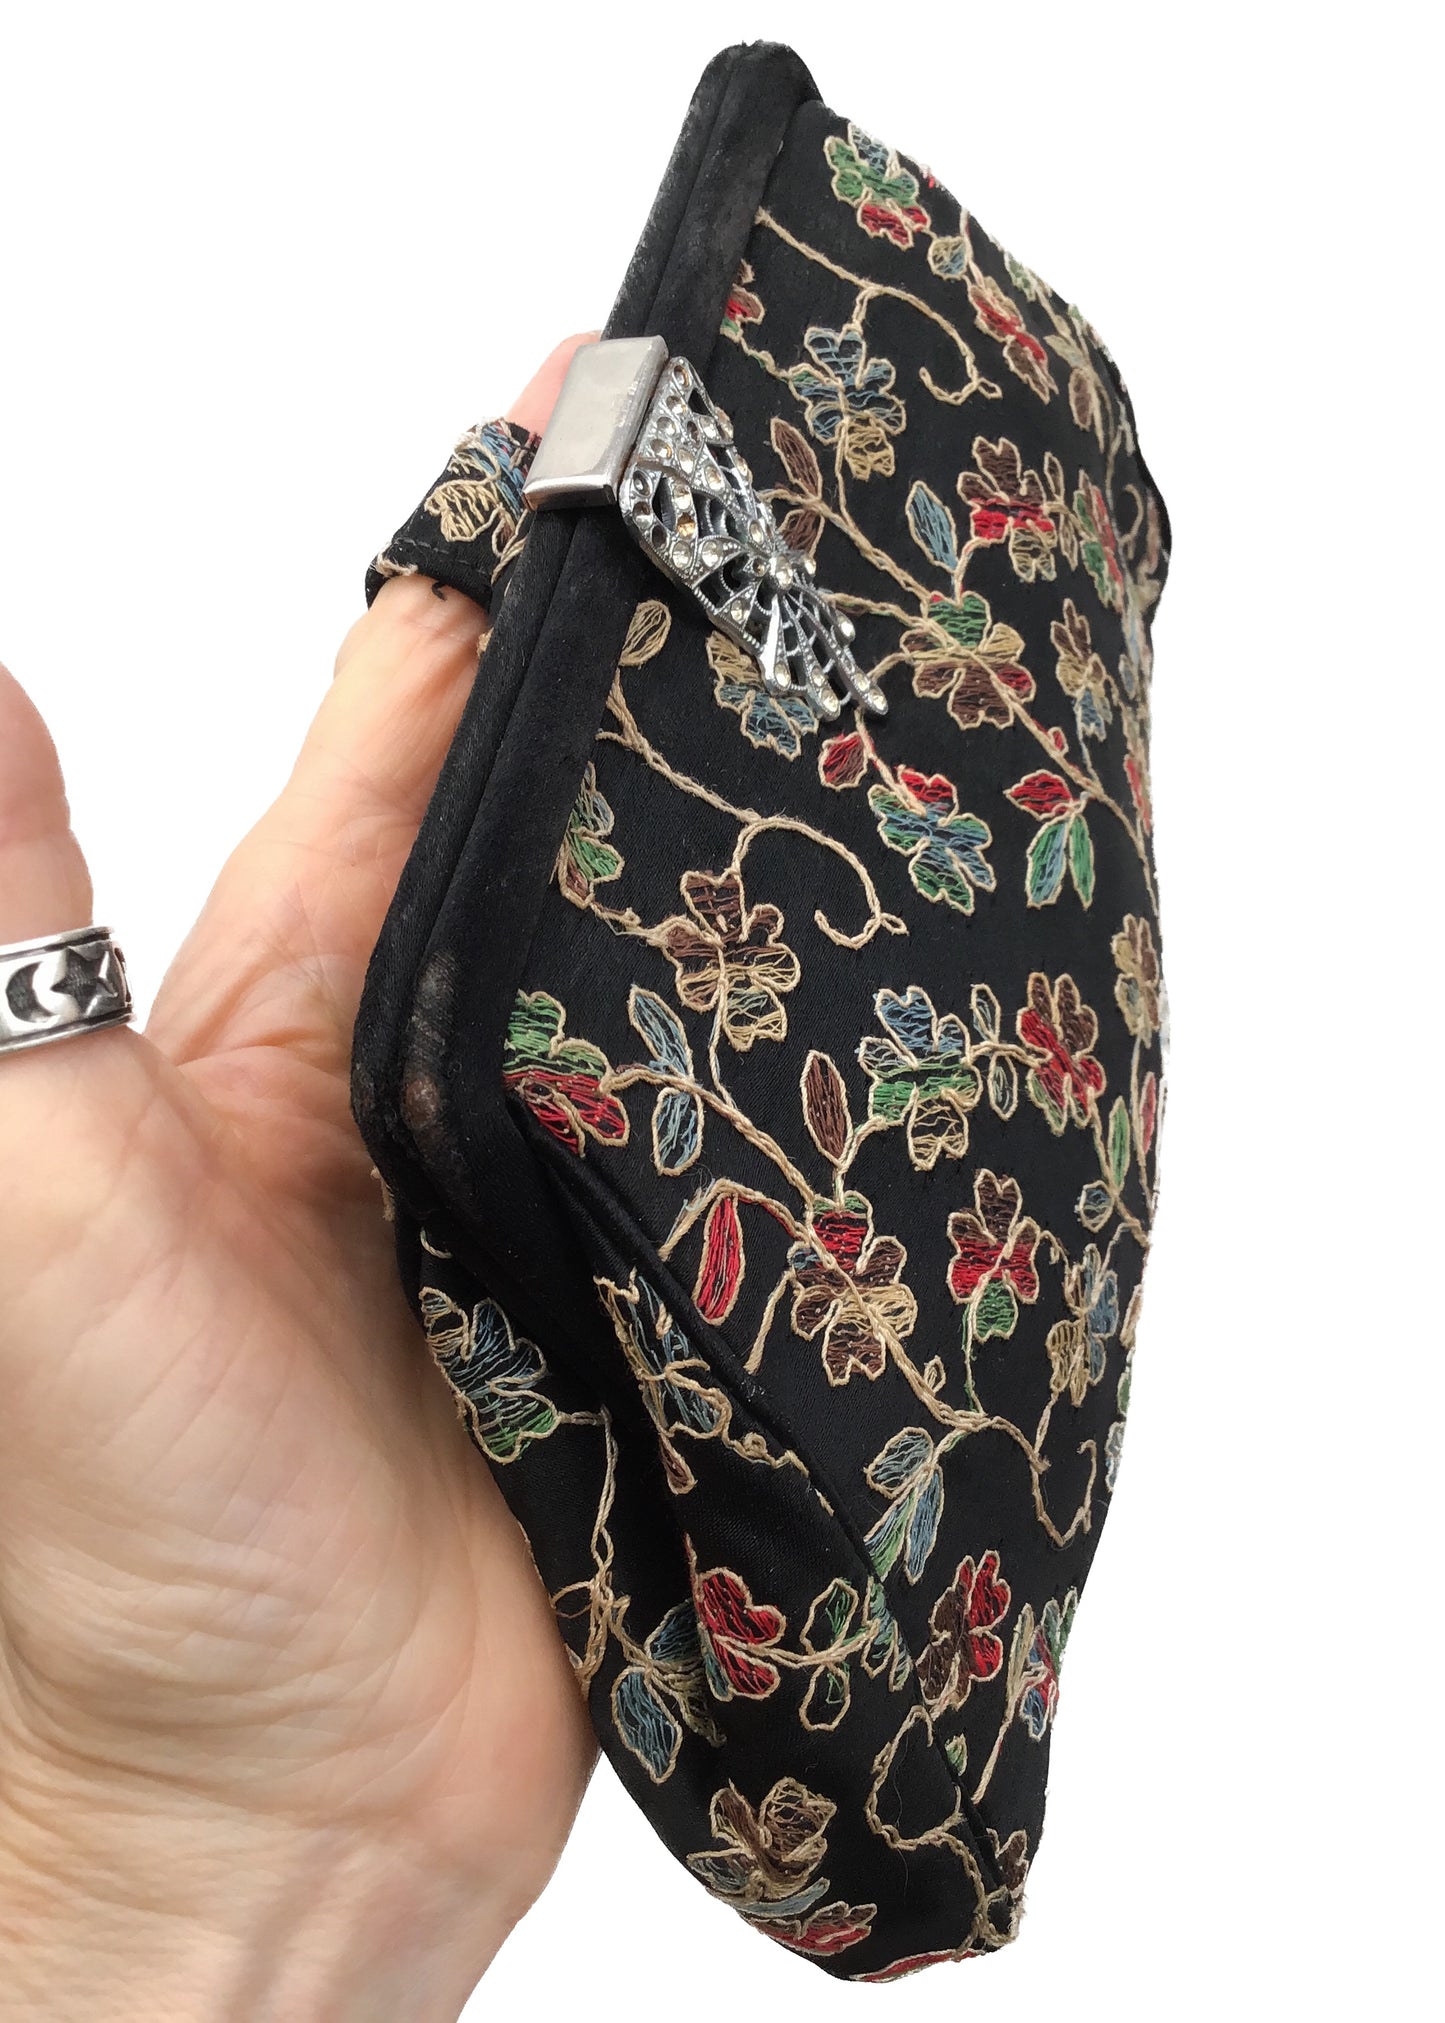 Vintage Deco Embroidered Clutch Purse with Rhinestone Clasp • Evening Bag